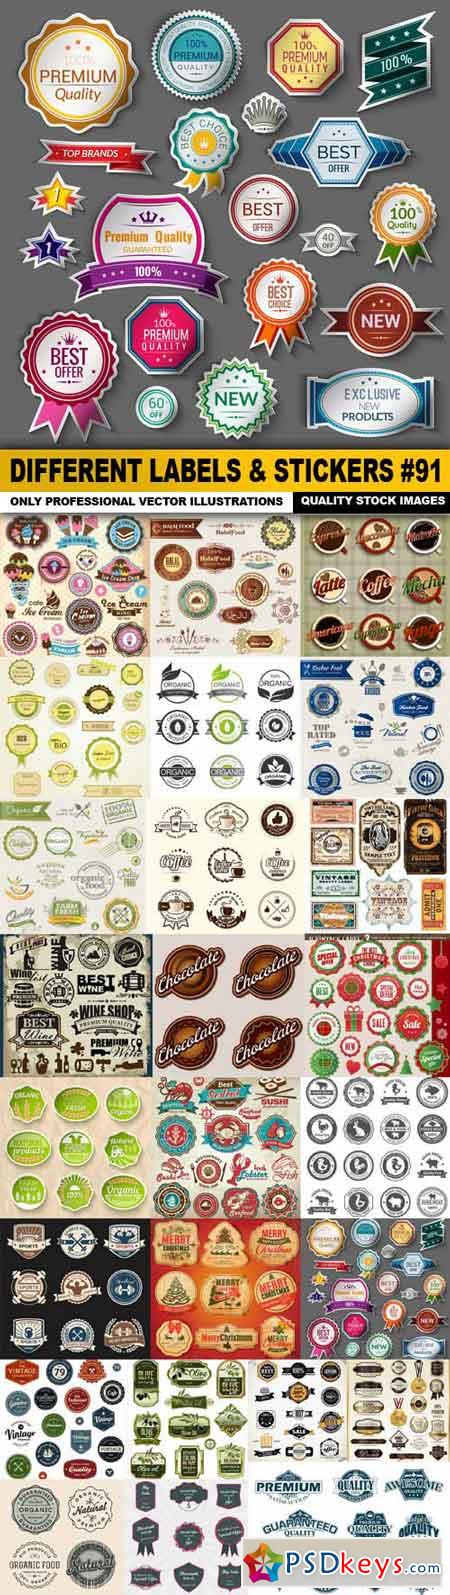 Different Labels & Stickers #91 - 25 Vector